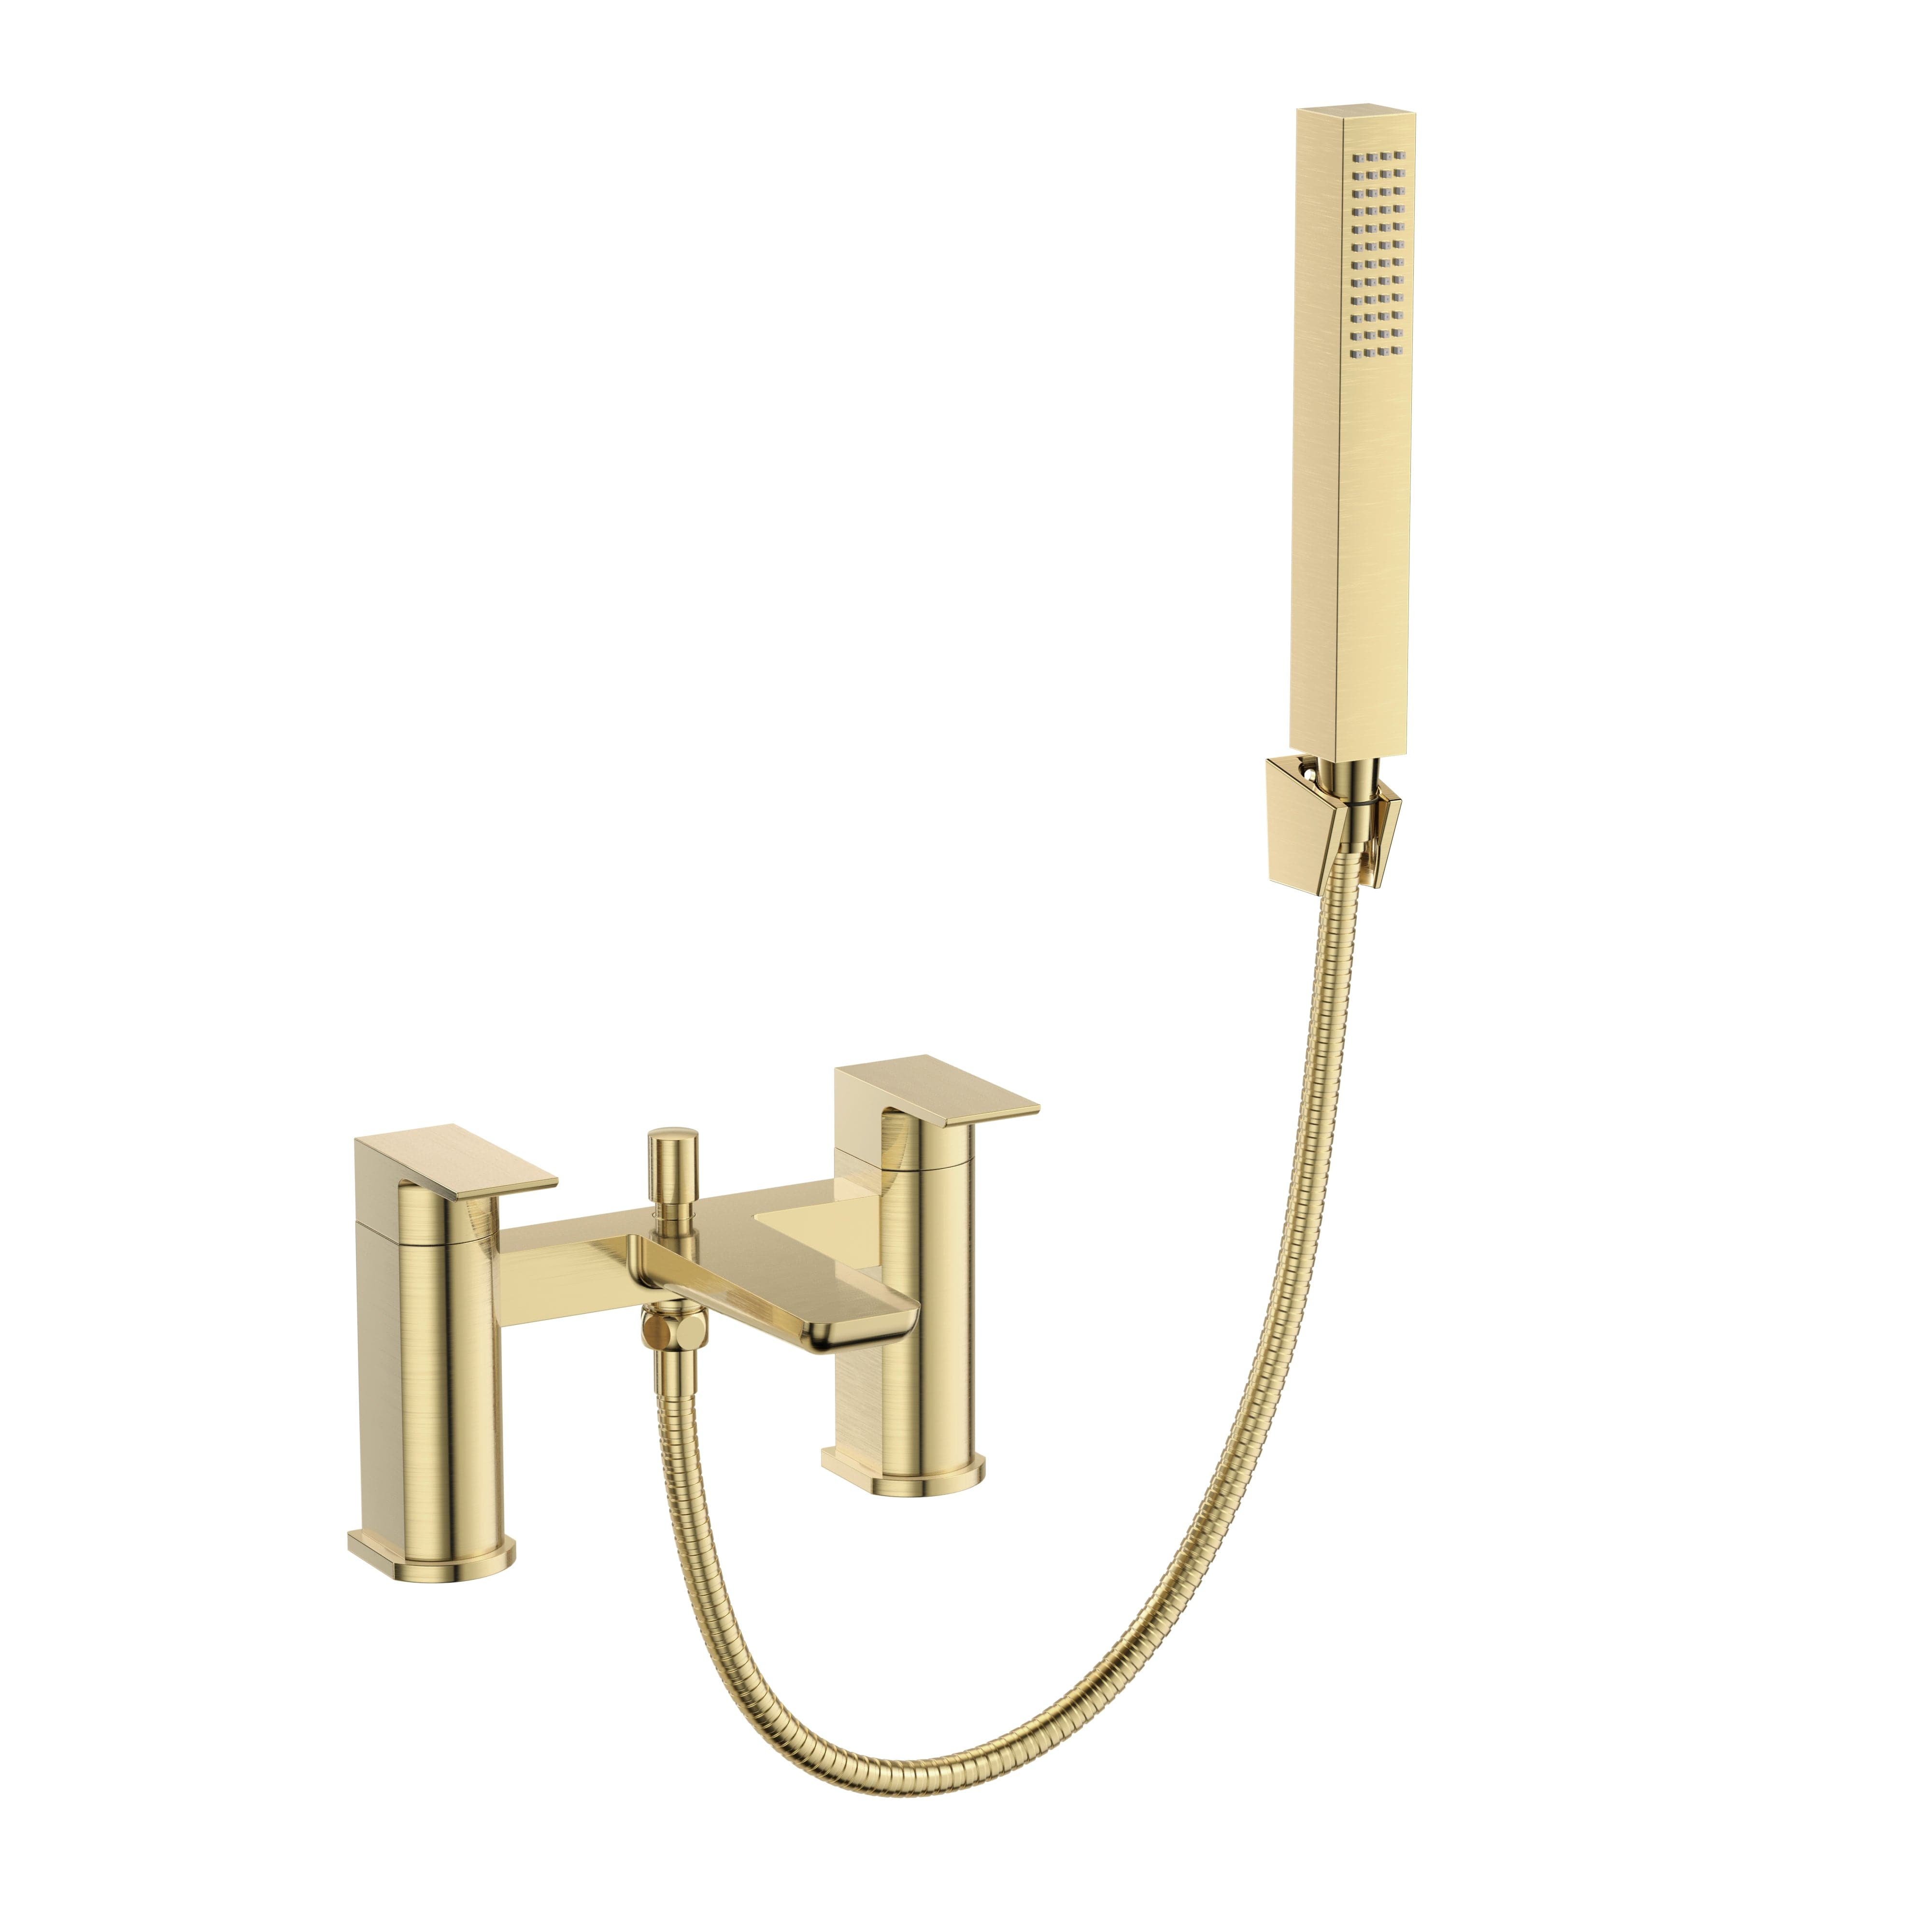 Lunar Soft Square Bath Shower Mixer Tap with Kit in Brushed Brass - Elegant and modern bath shower mixer tap for luxurious bathrooms. Trendy bathroom fixtures UK.